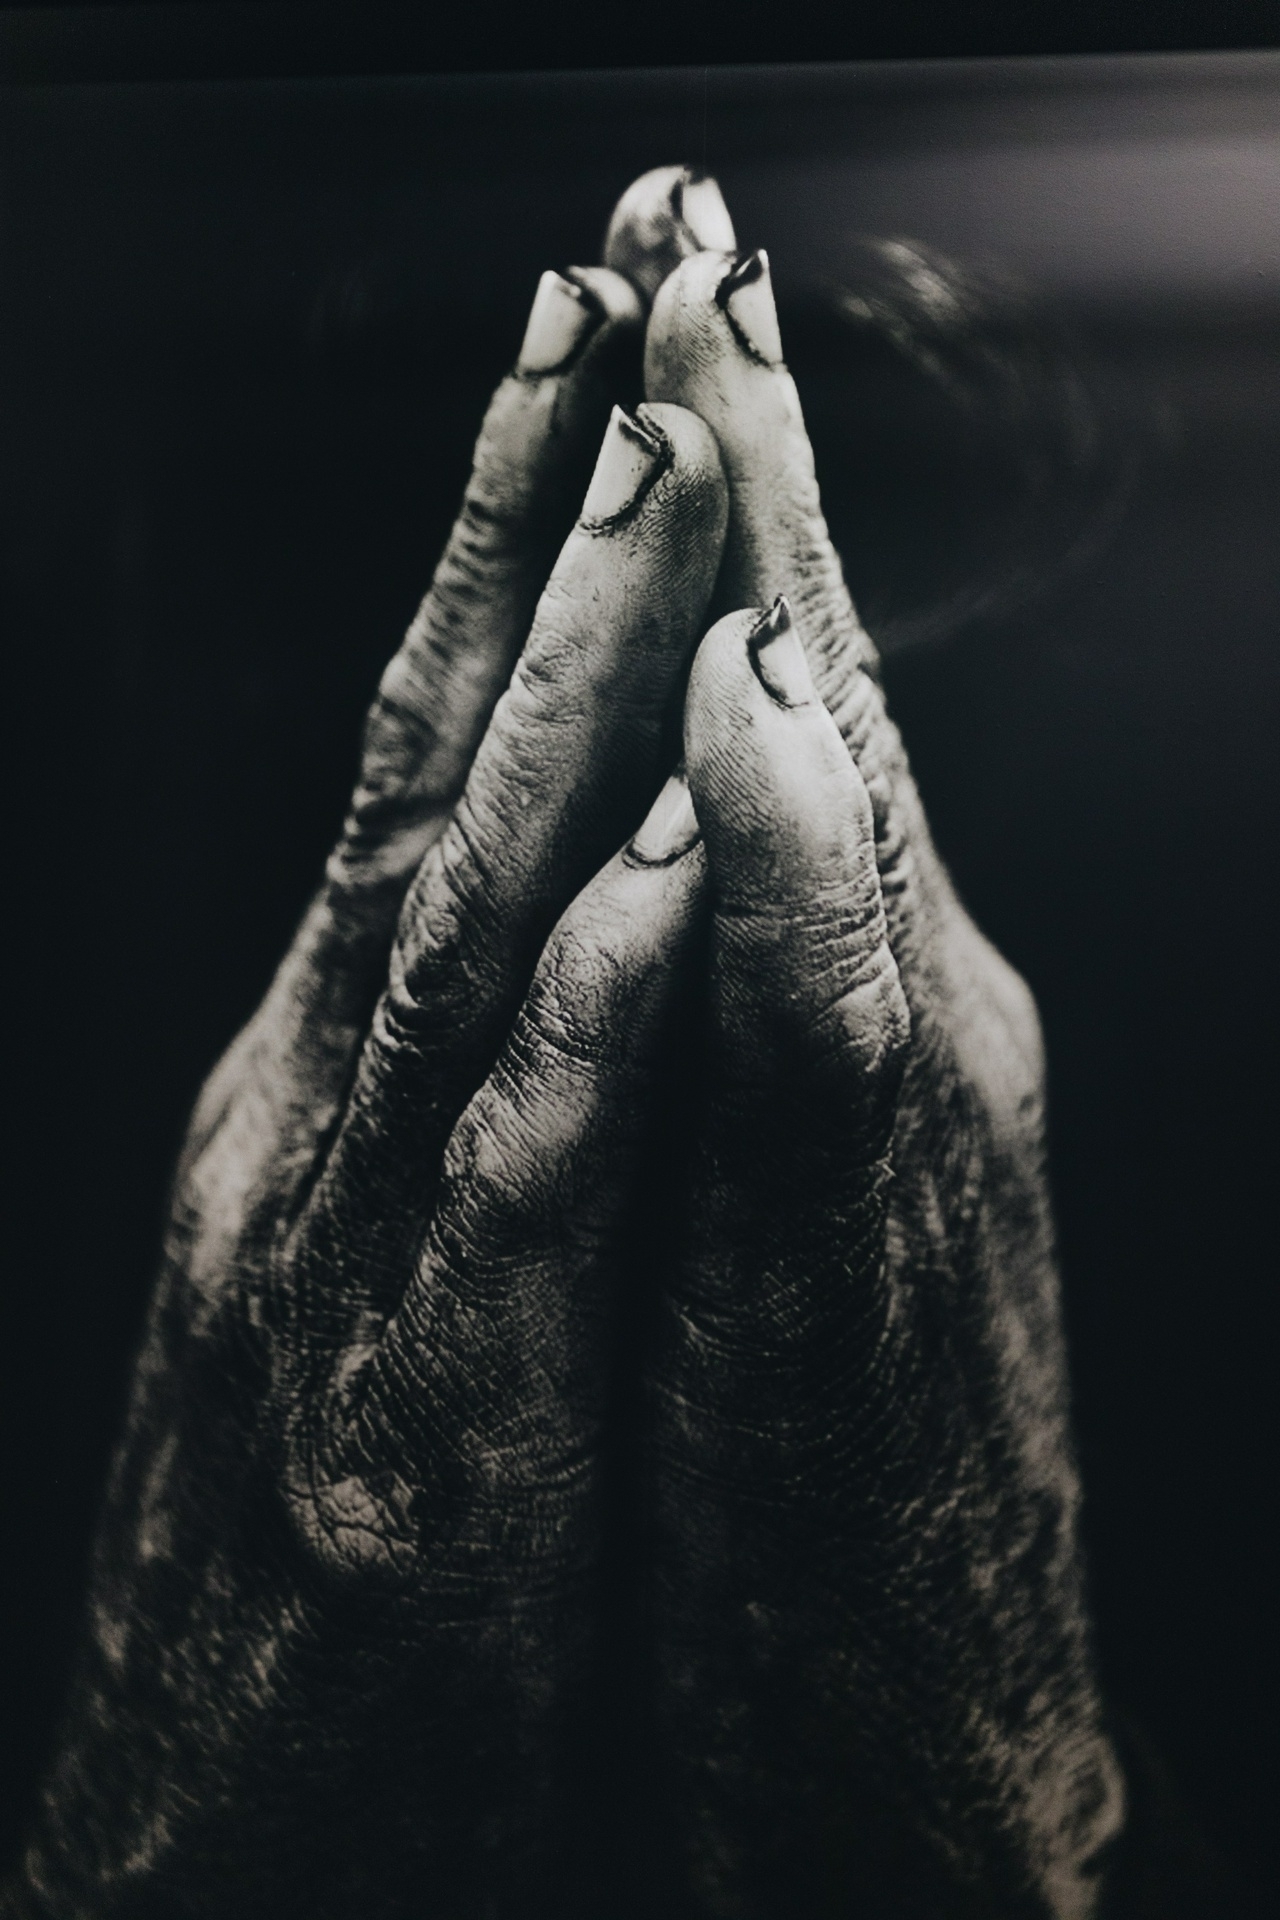 Photo of dirty hands clasped in prayer by Nathan Dumlao on Unsplash